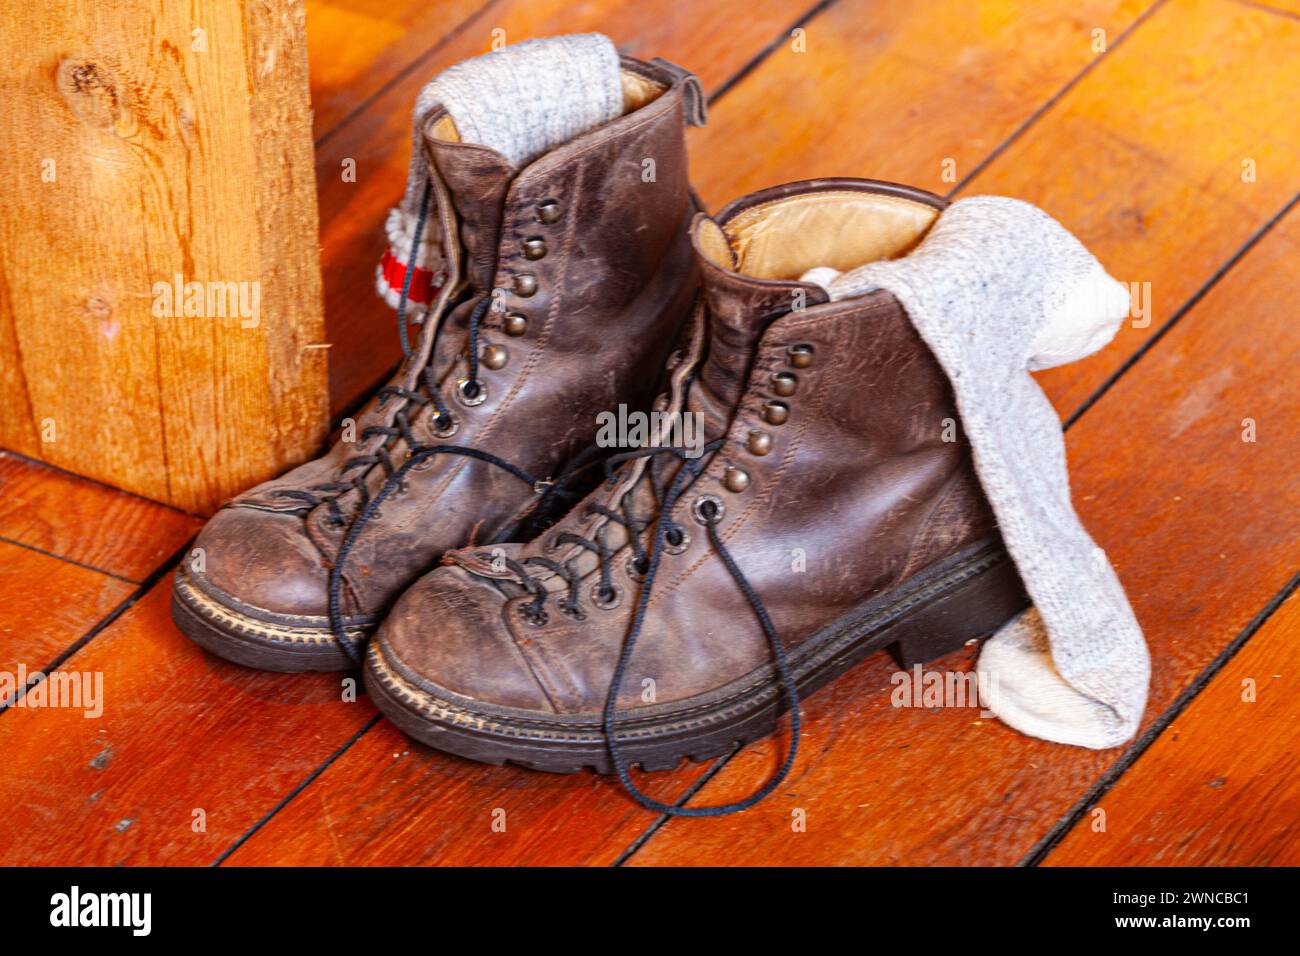 Old Hiking Boots With Boot Socks And Hip Flask On A Wooden Shelf Stock  Photo - Download Image Now - iStock